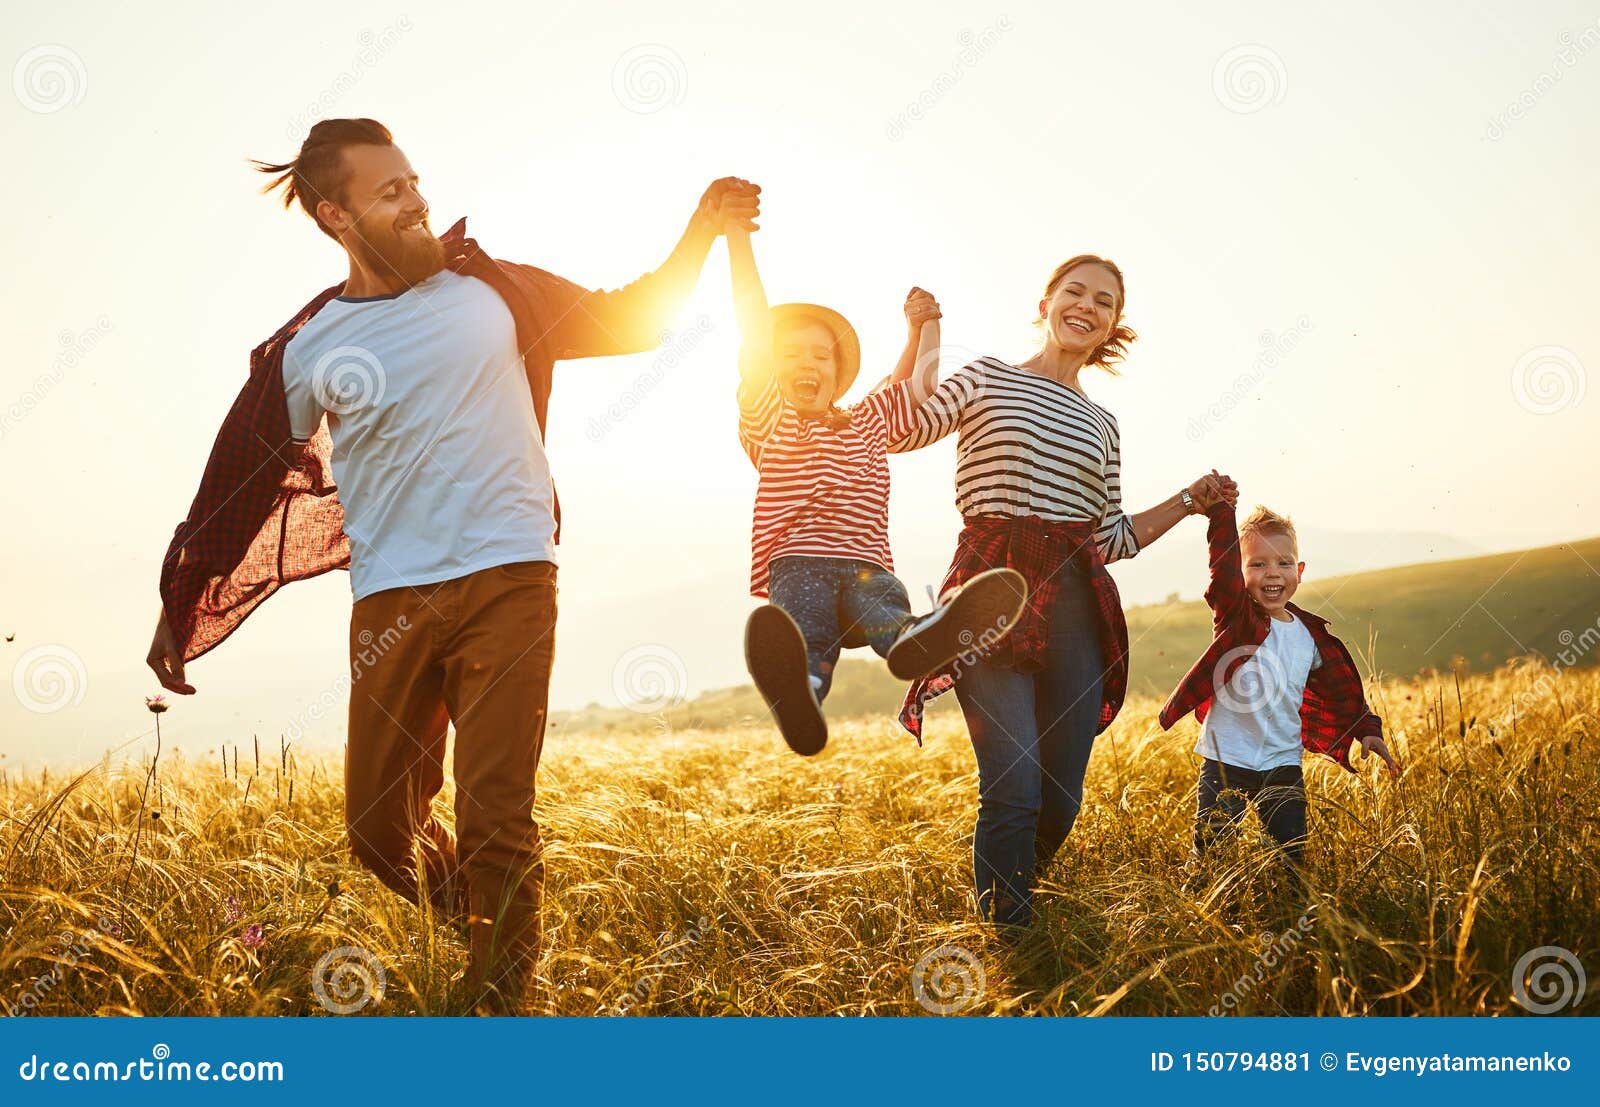 happy family: mother, father, children son and daughter on sunset